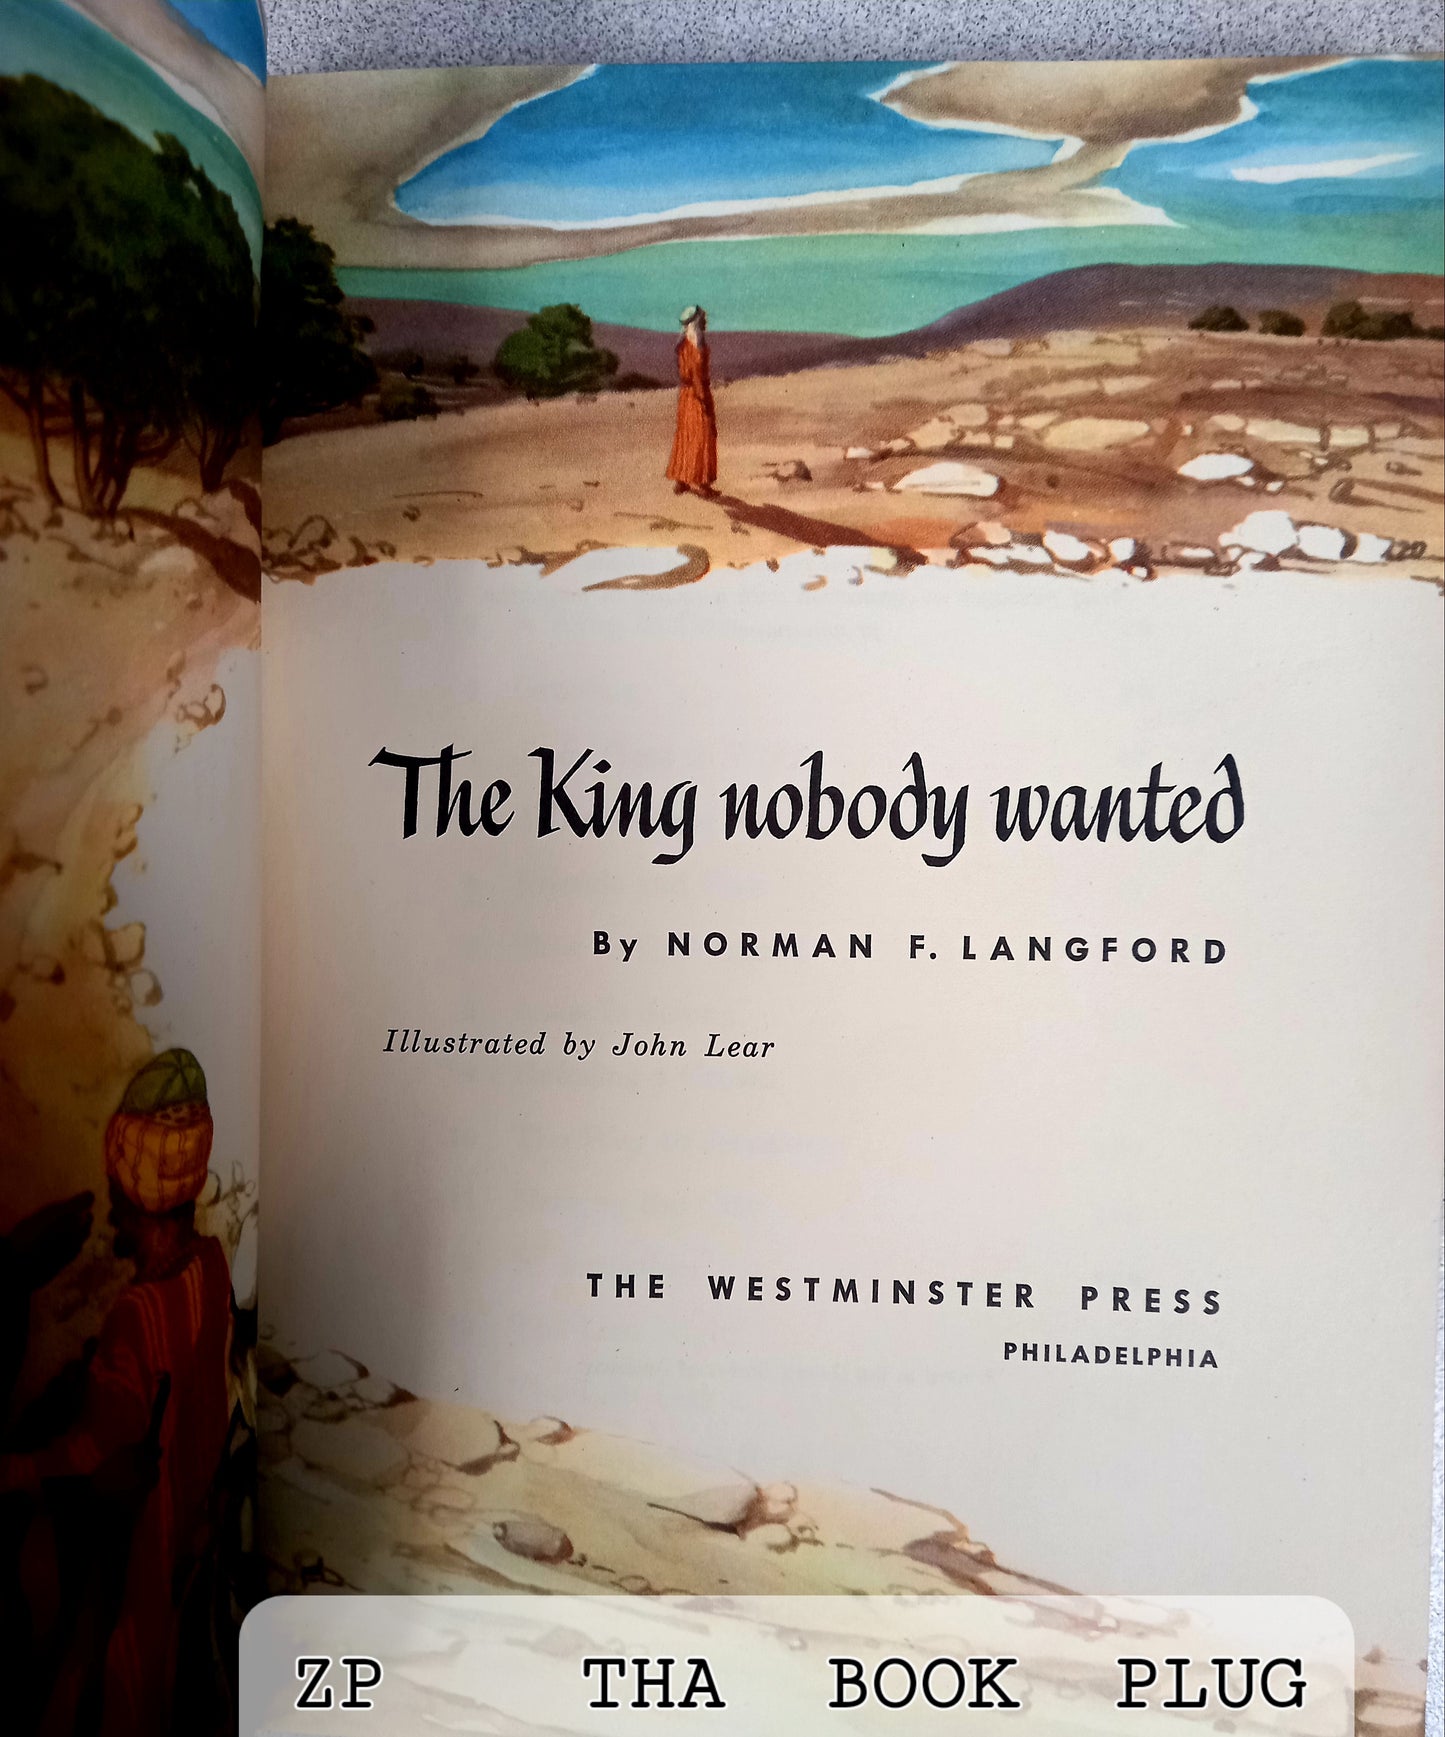 The King nobody wanted